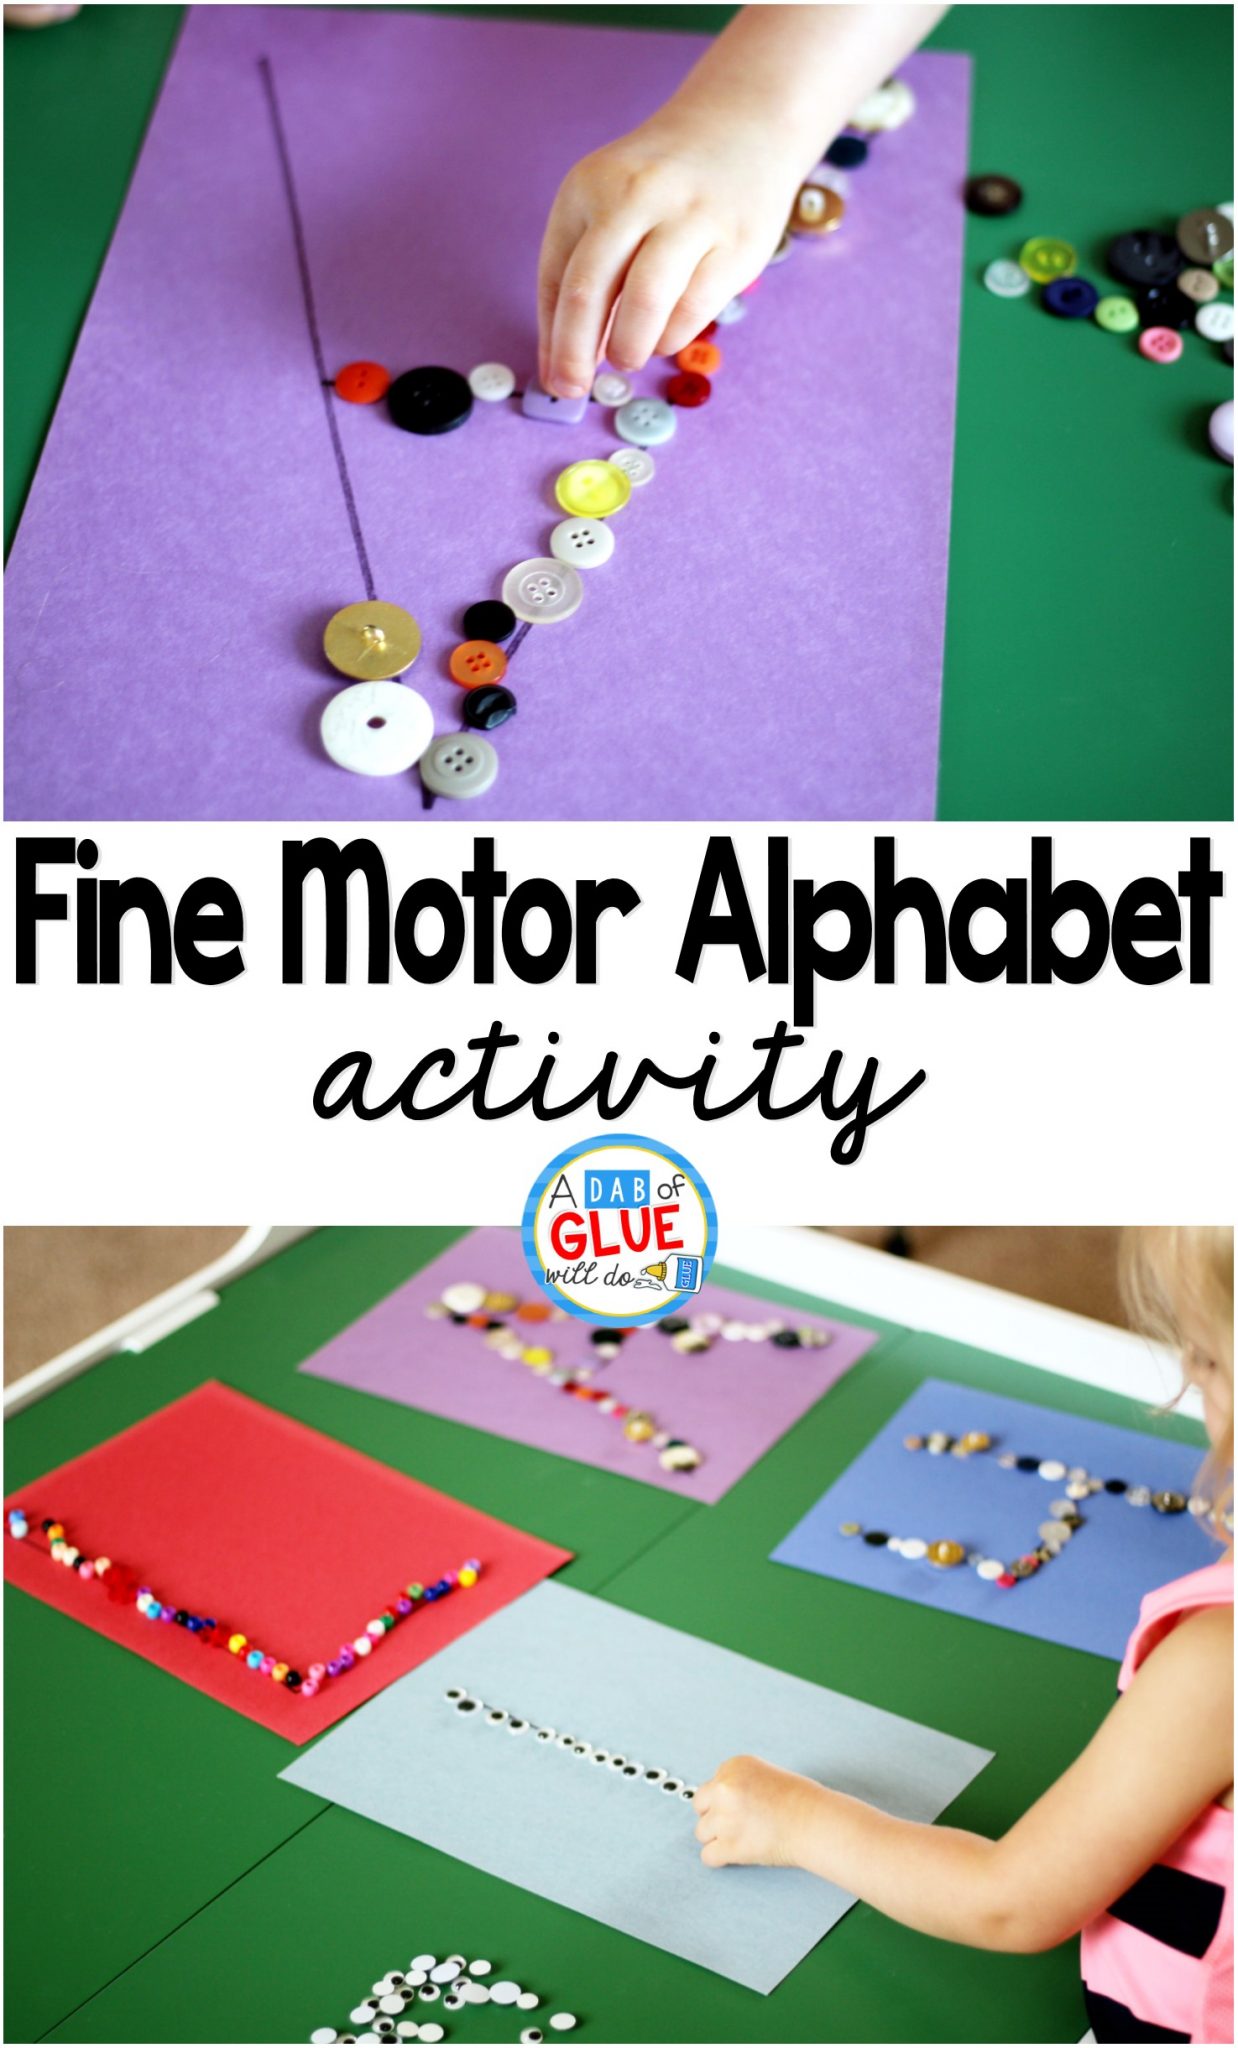 Fine Motor Skills Alphabet Activity like this is a great option for you to keep kids busy while also helping them learn! Your little ones will love this!